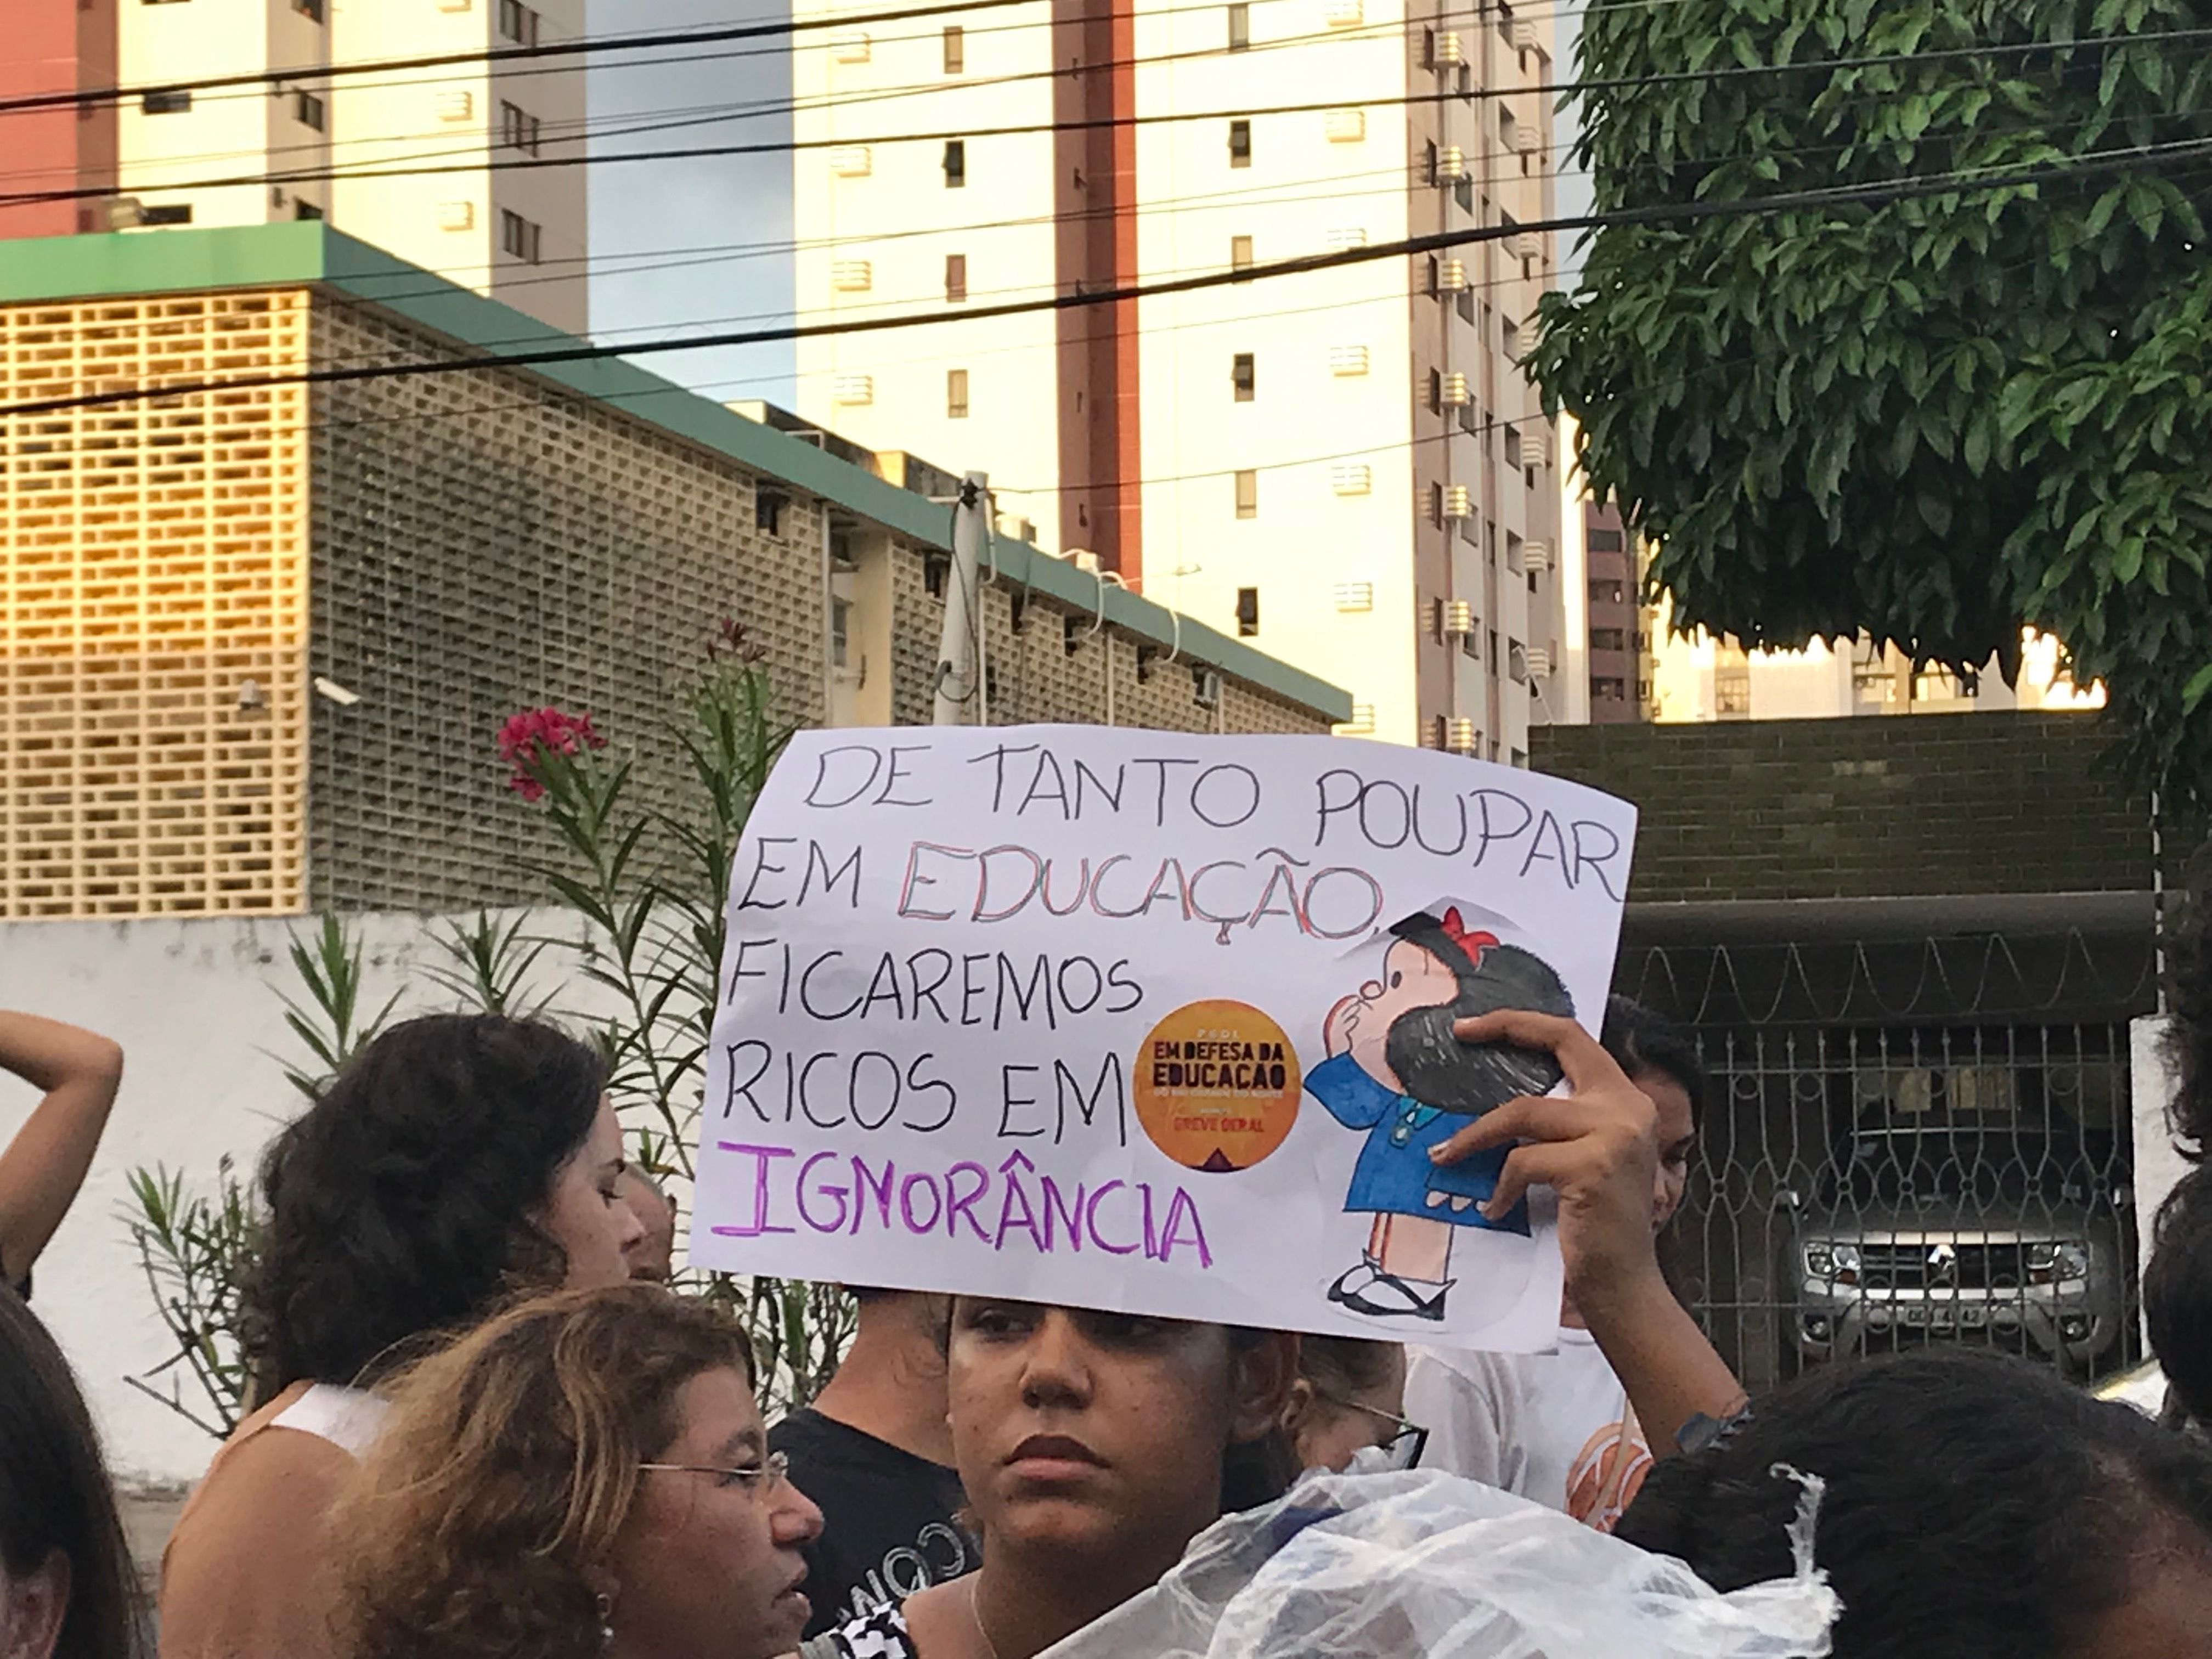 A protester's sign reads “For as long as we save spending on education, we will be rich in ignorance.” Brazil, 2019. Image by Rafael Lima.